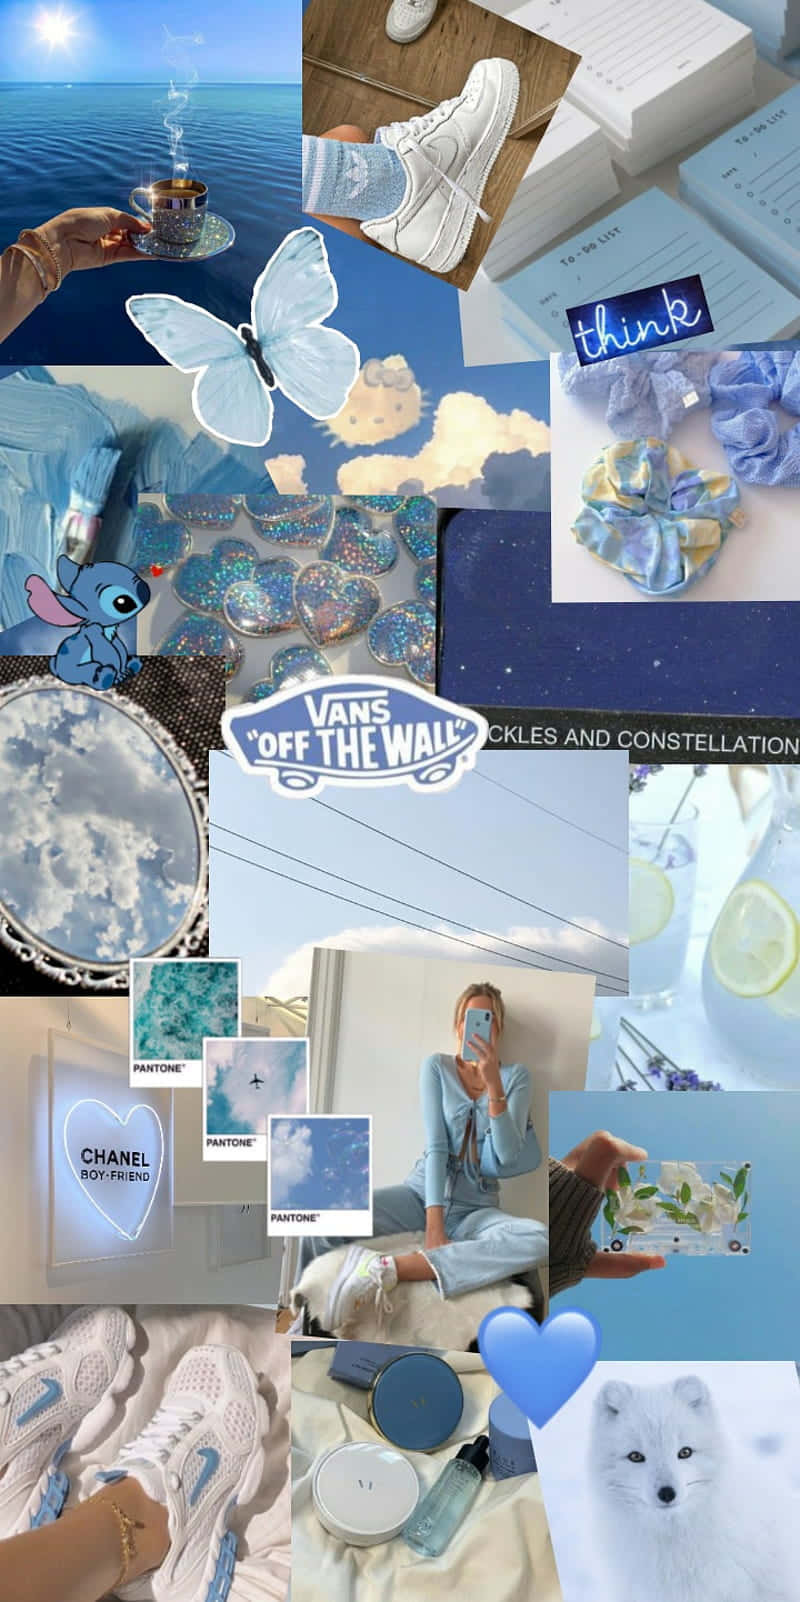 A Collage Of Pictures Of Blue And White Items